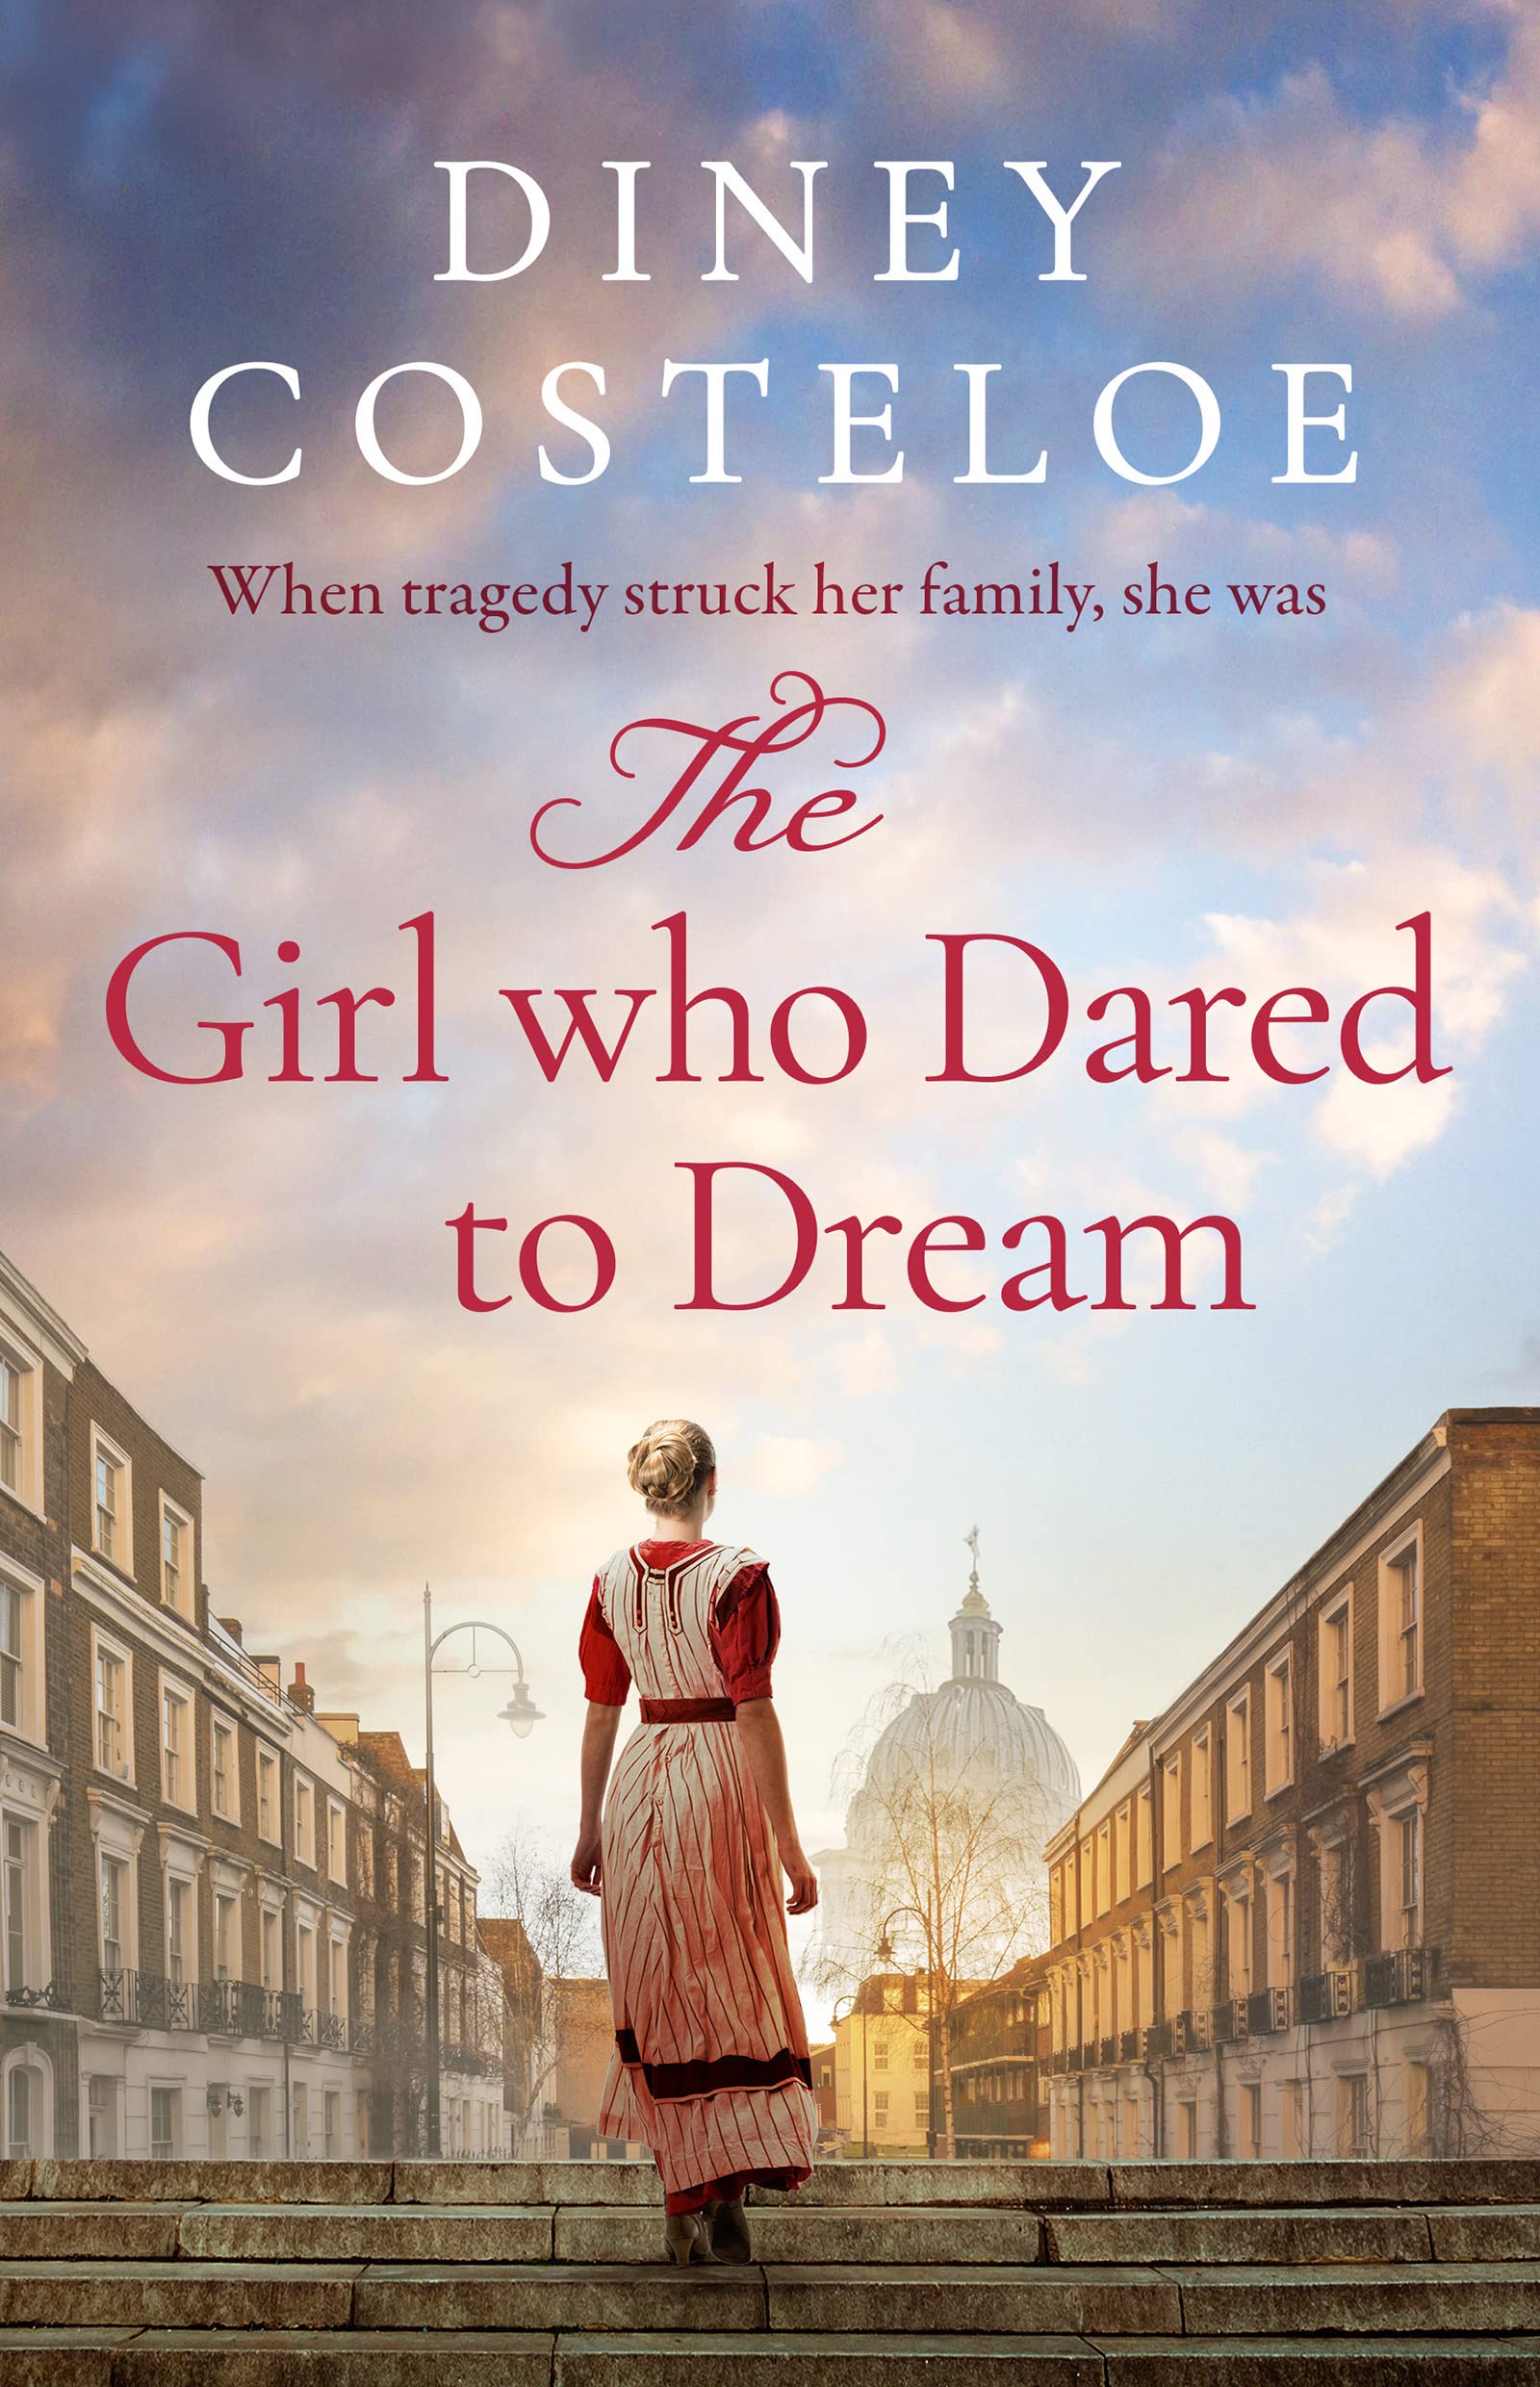 Diney Costeloe: The Girl who dared to dream